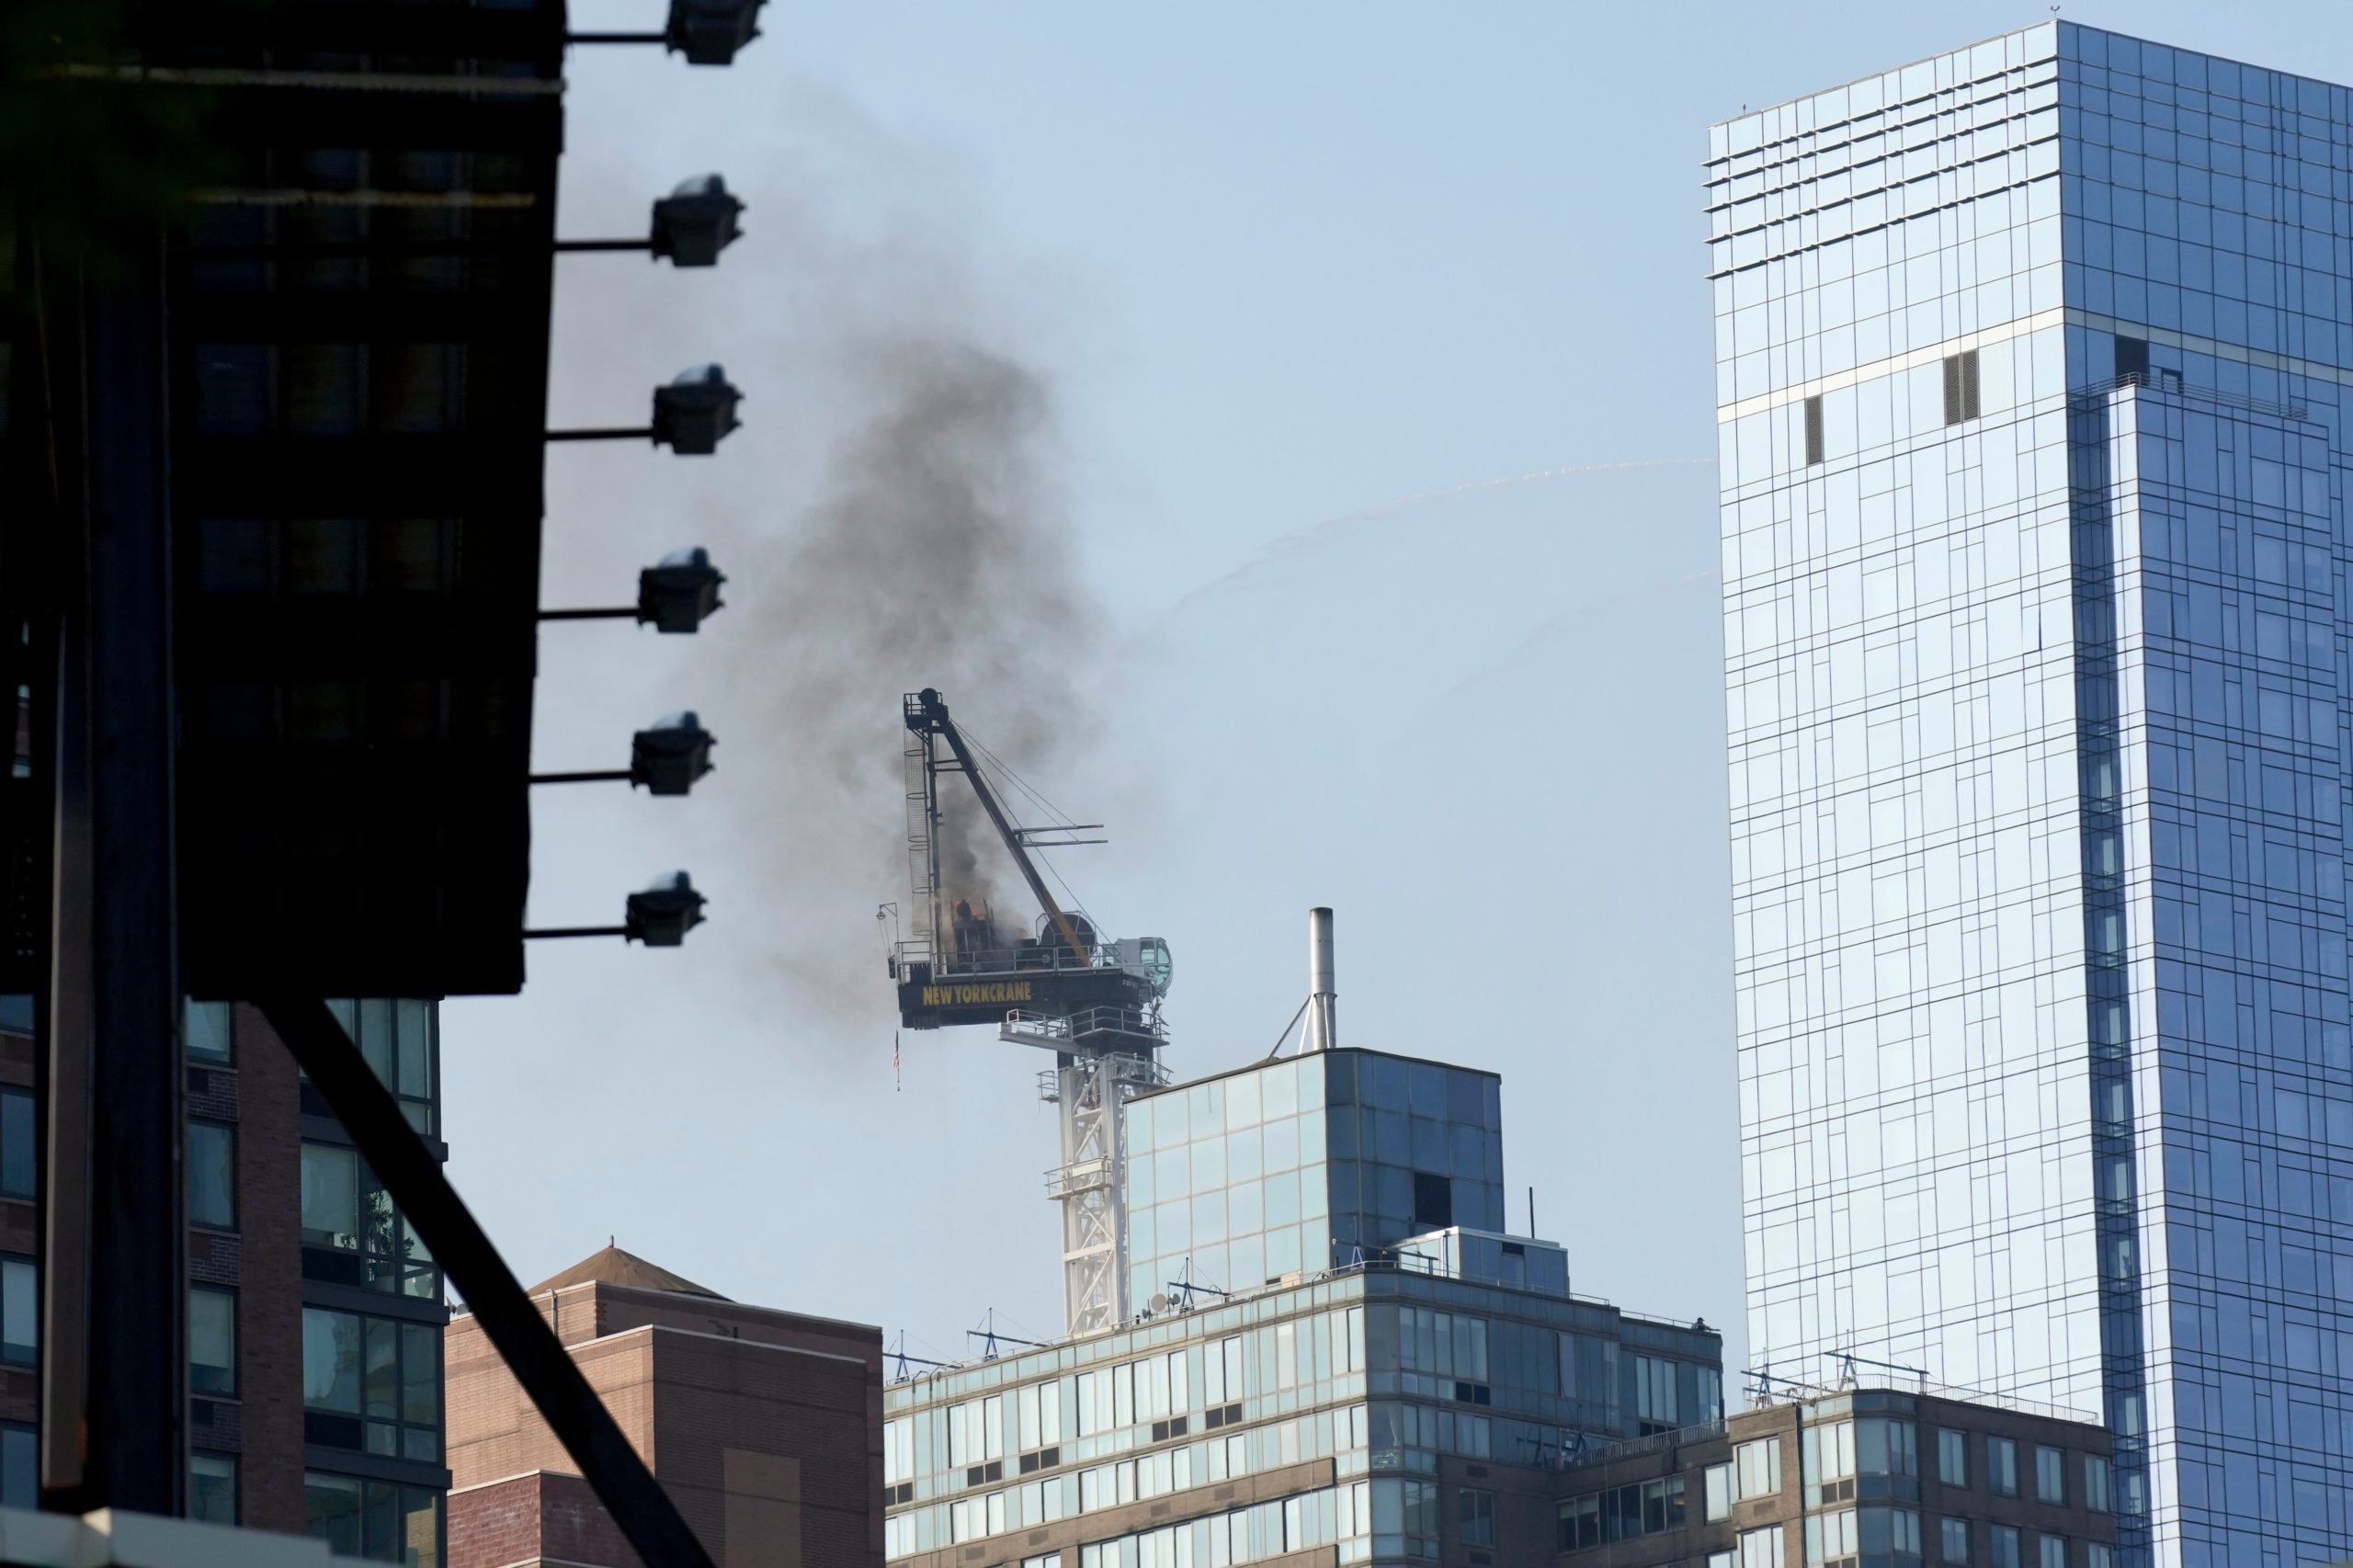 Pedestrians scatter as fire causes New York construction crane’s arm to collapse and crash to street